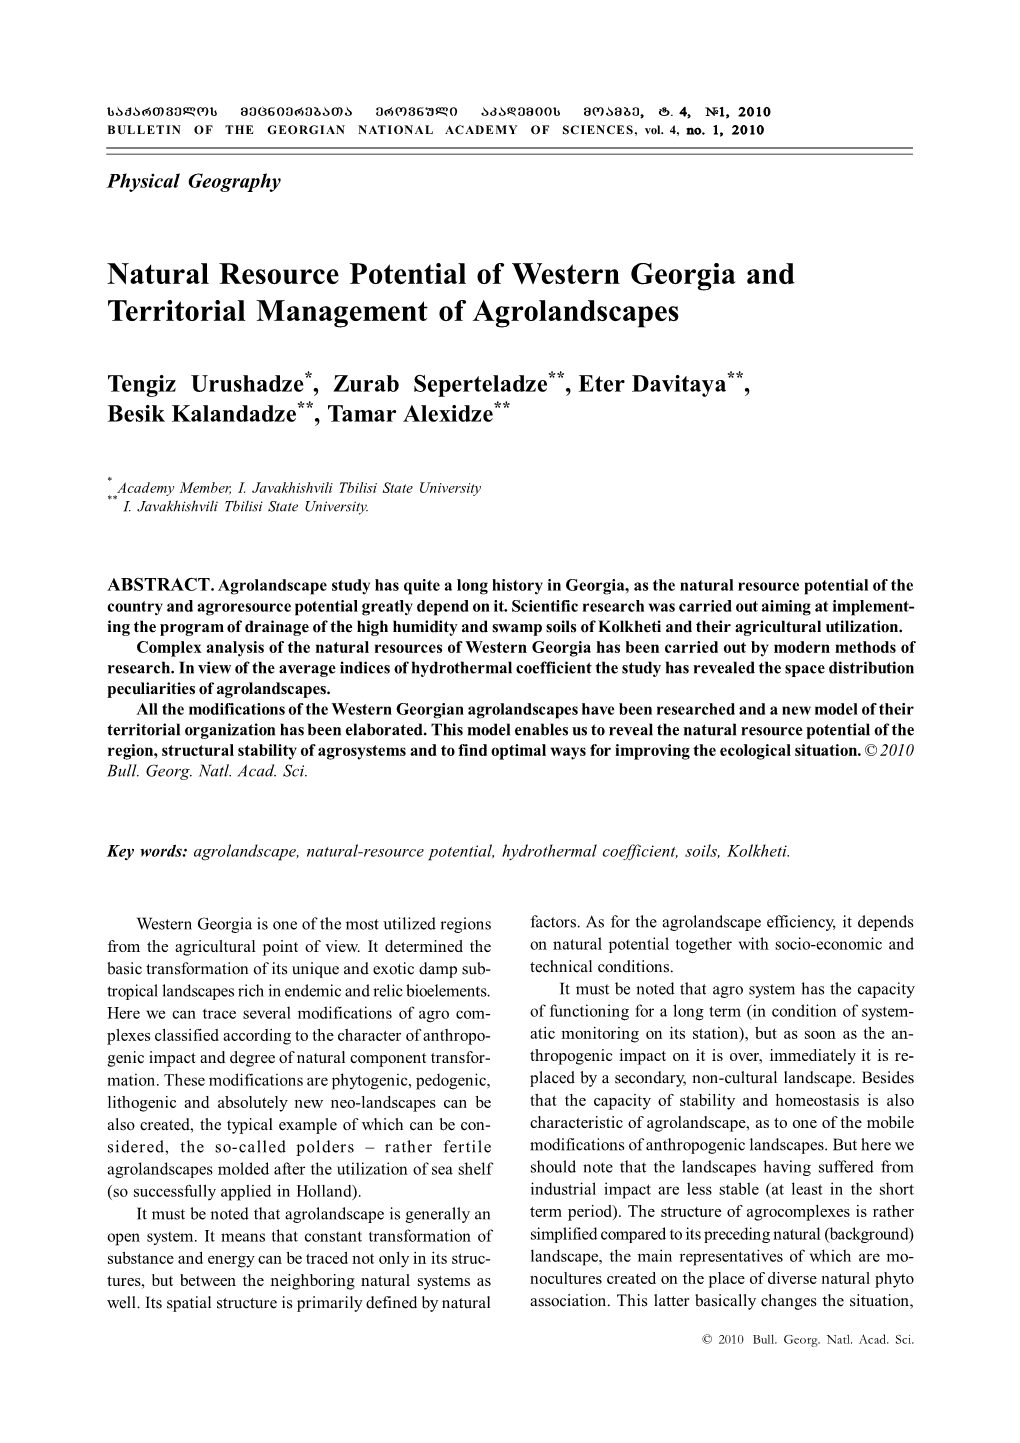 Natural Resource Potential of Western Georgia and Territorial Management of Agrolandscapes